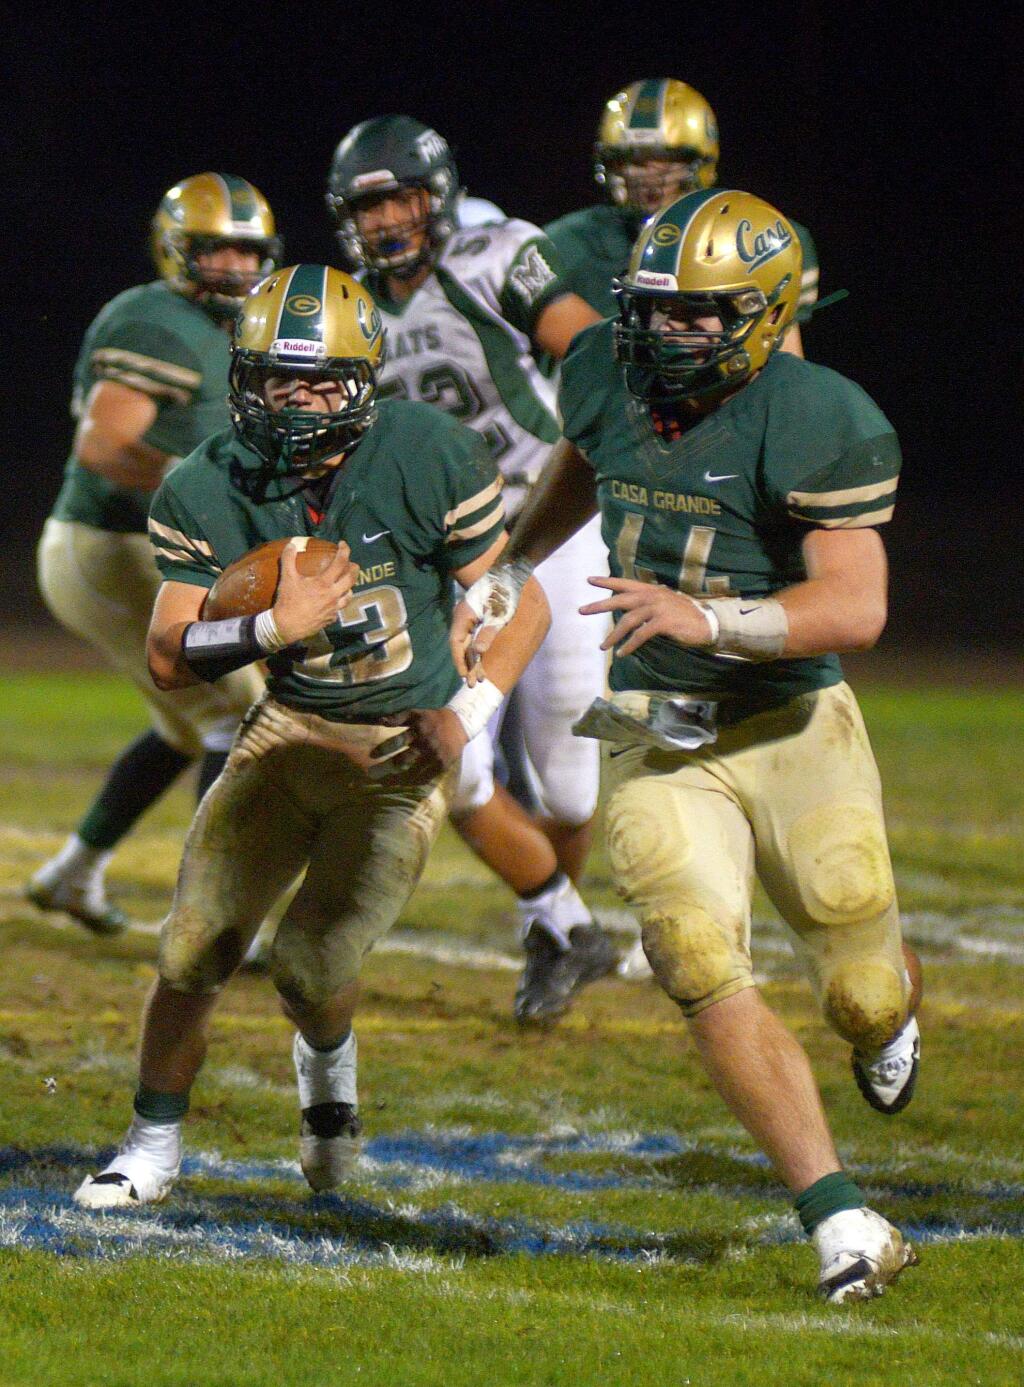 SUMNER FOWLER/FOR THE ARGUS-COURIERCasey Longaker (44) escorts Max Cerini (13) on his way to the end zone. Longaker and Cerini were among five Gauchos to score touchdowns in Casa's 48-6 win over Miramonte.